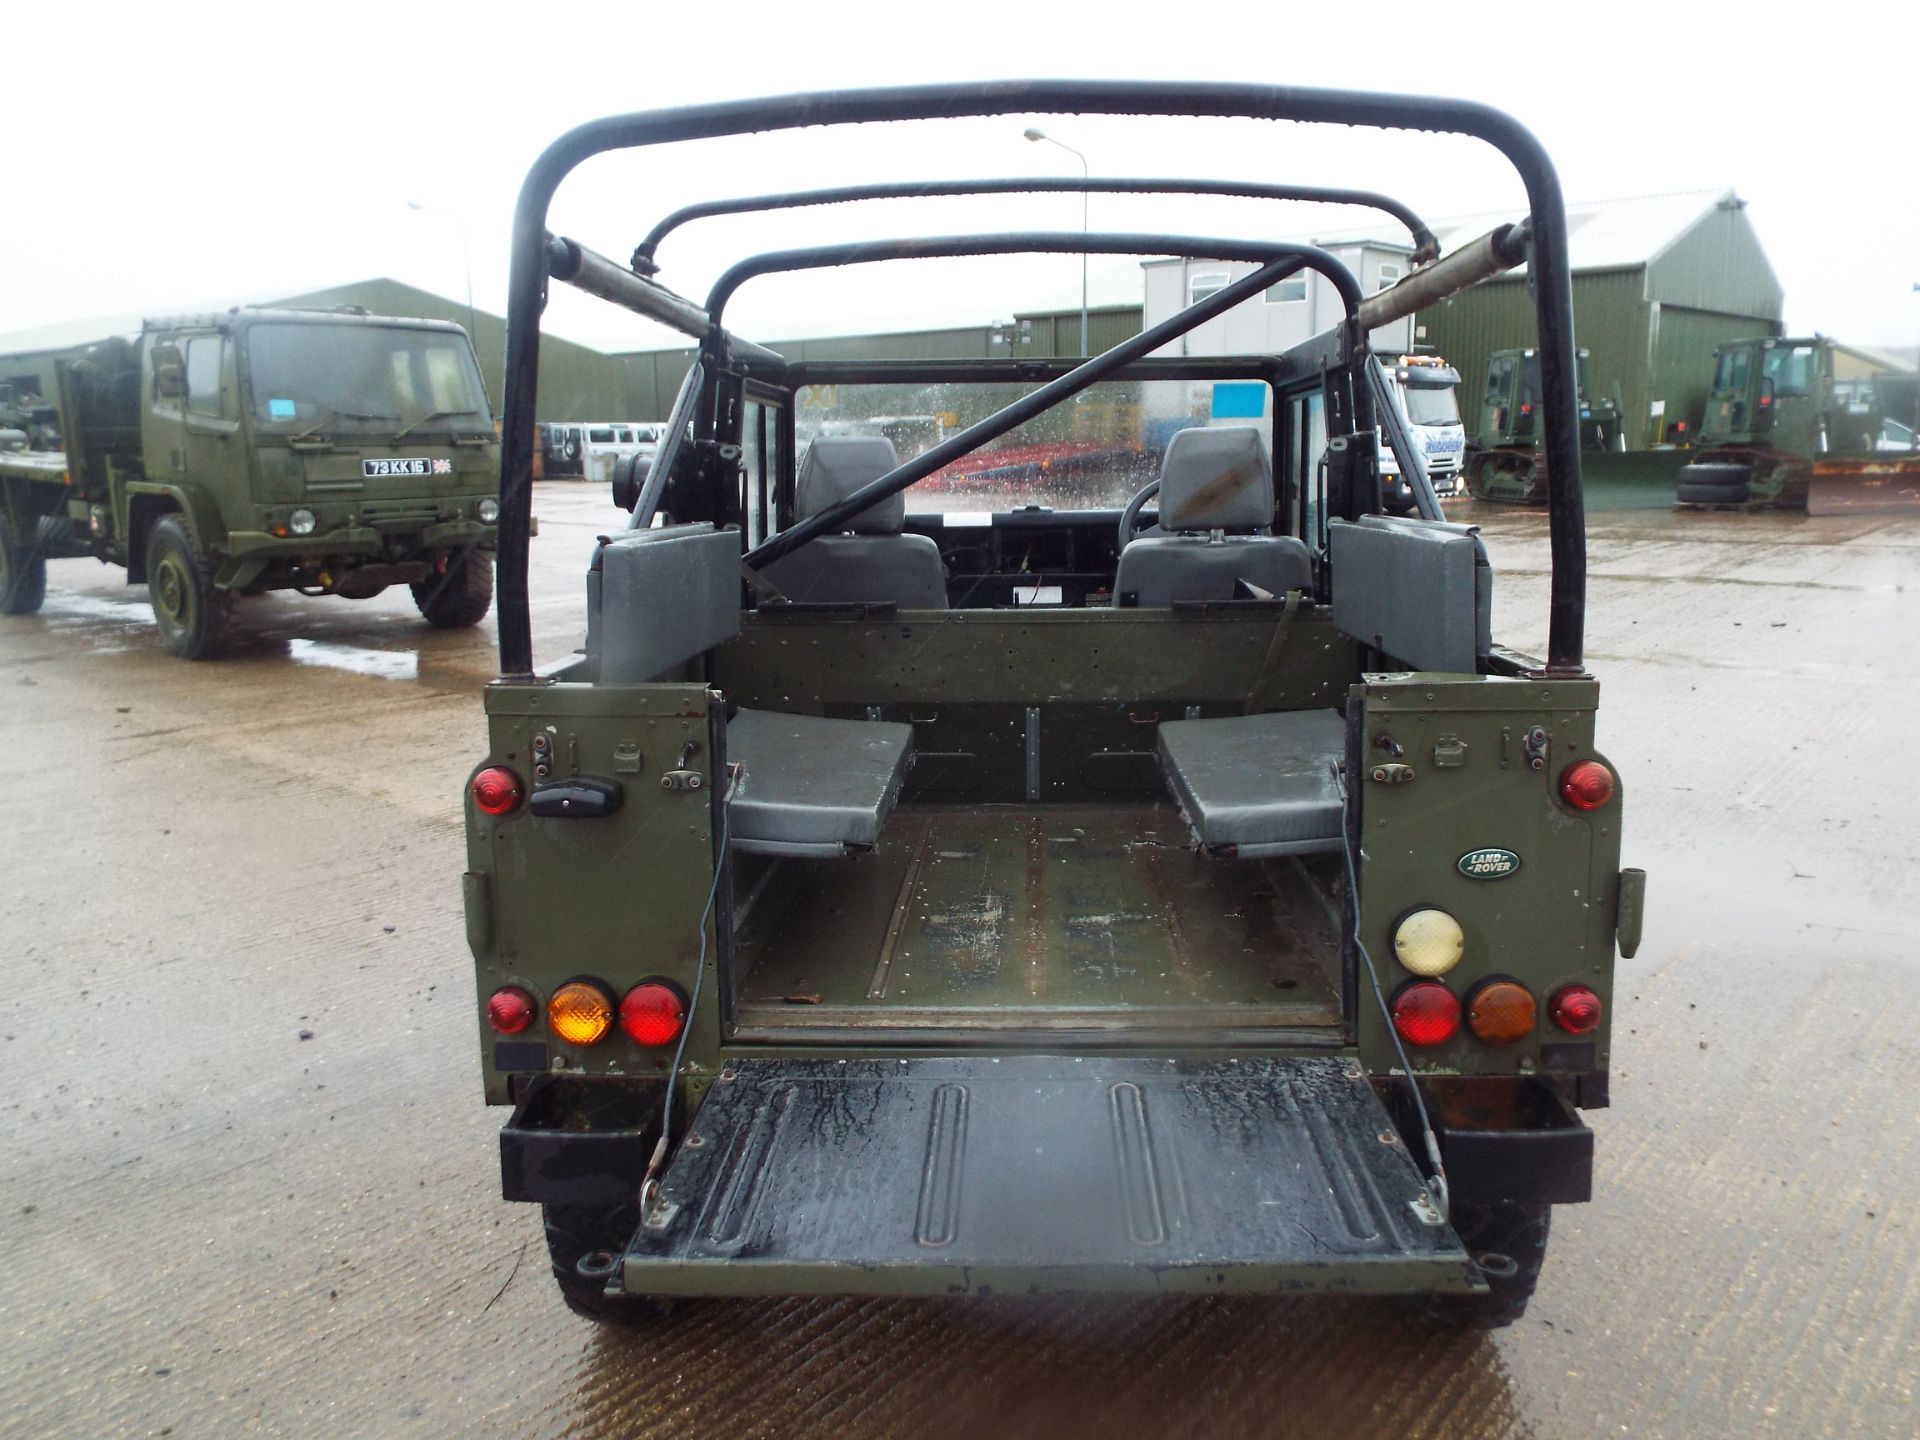 Military Specification Land Rover Wolf 90 Soft Top - Image 17 of 24